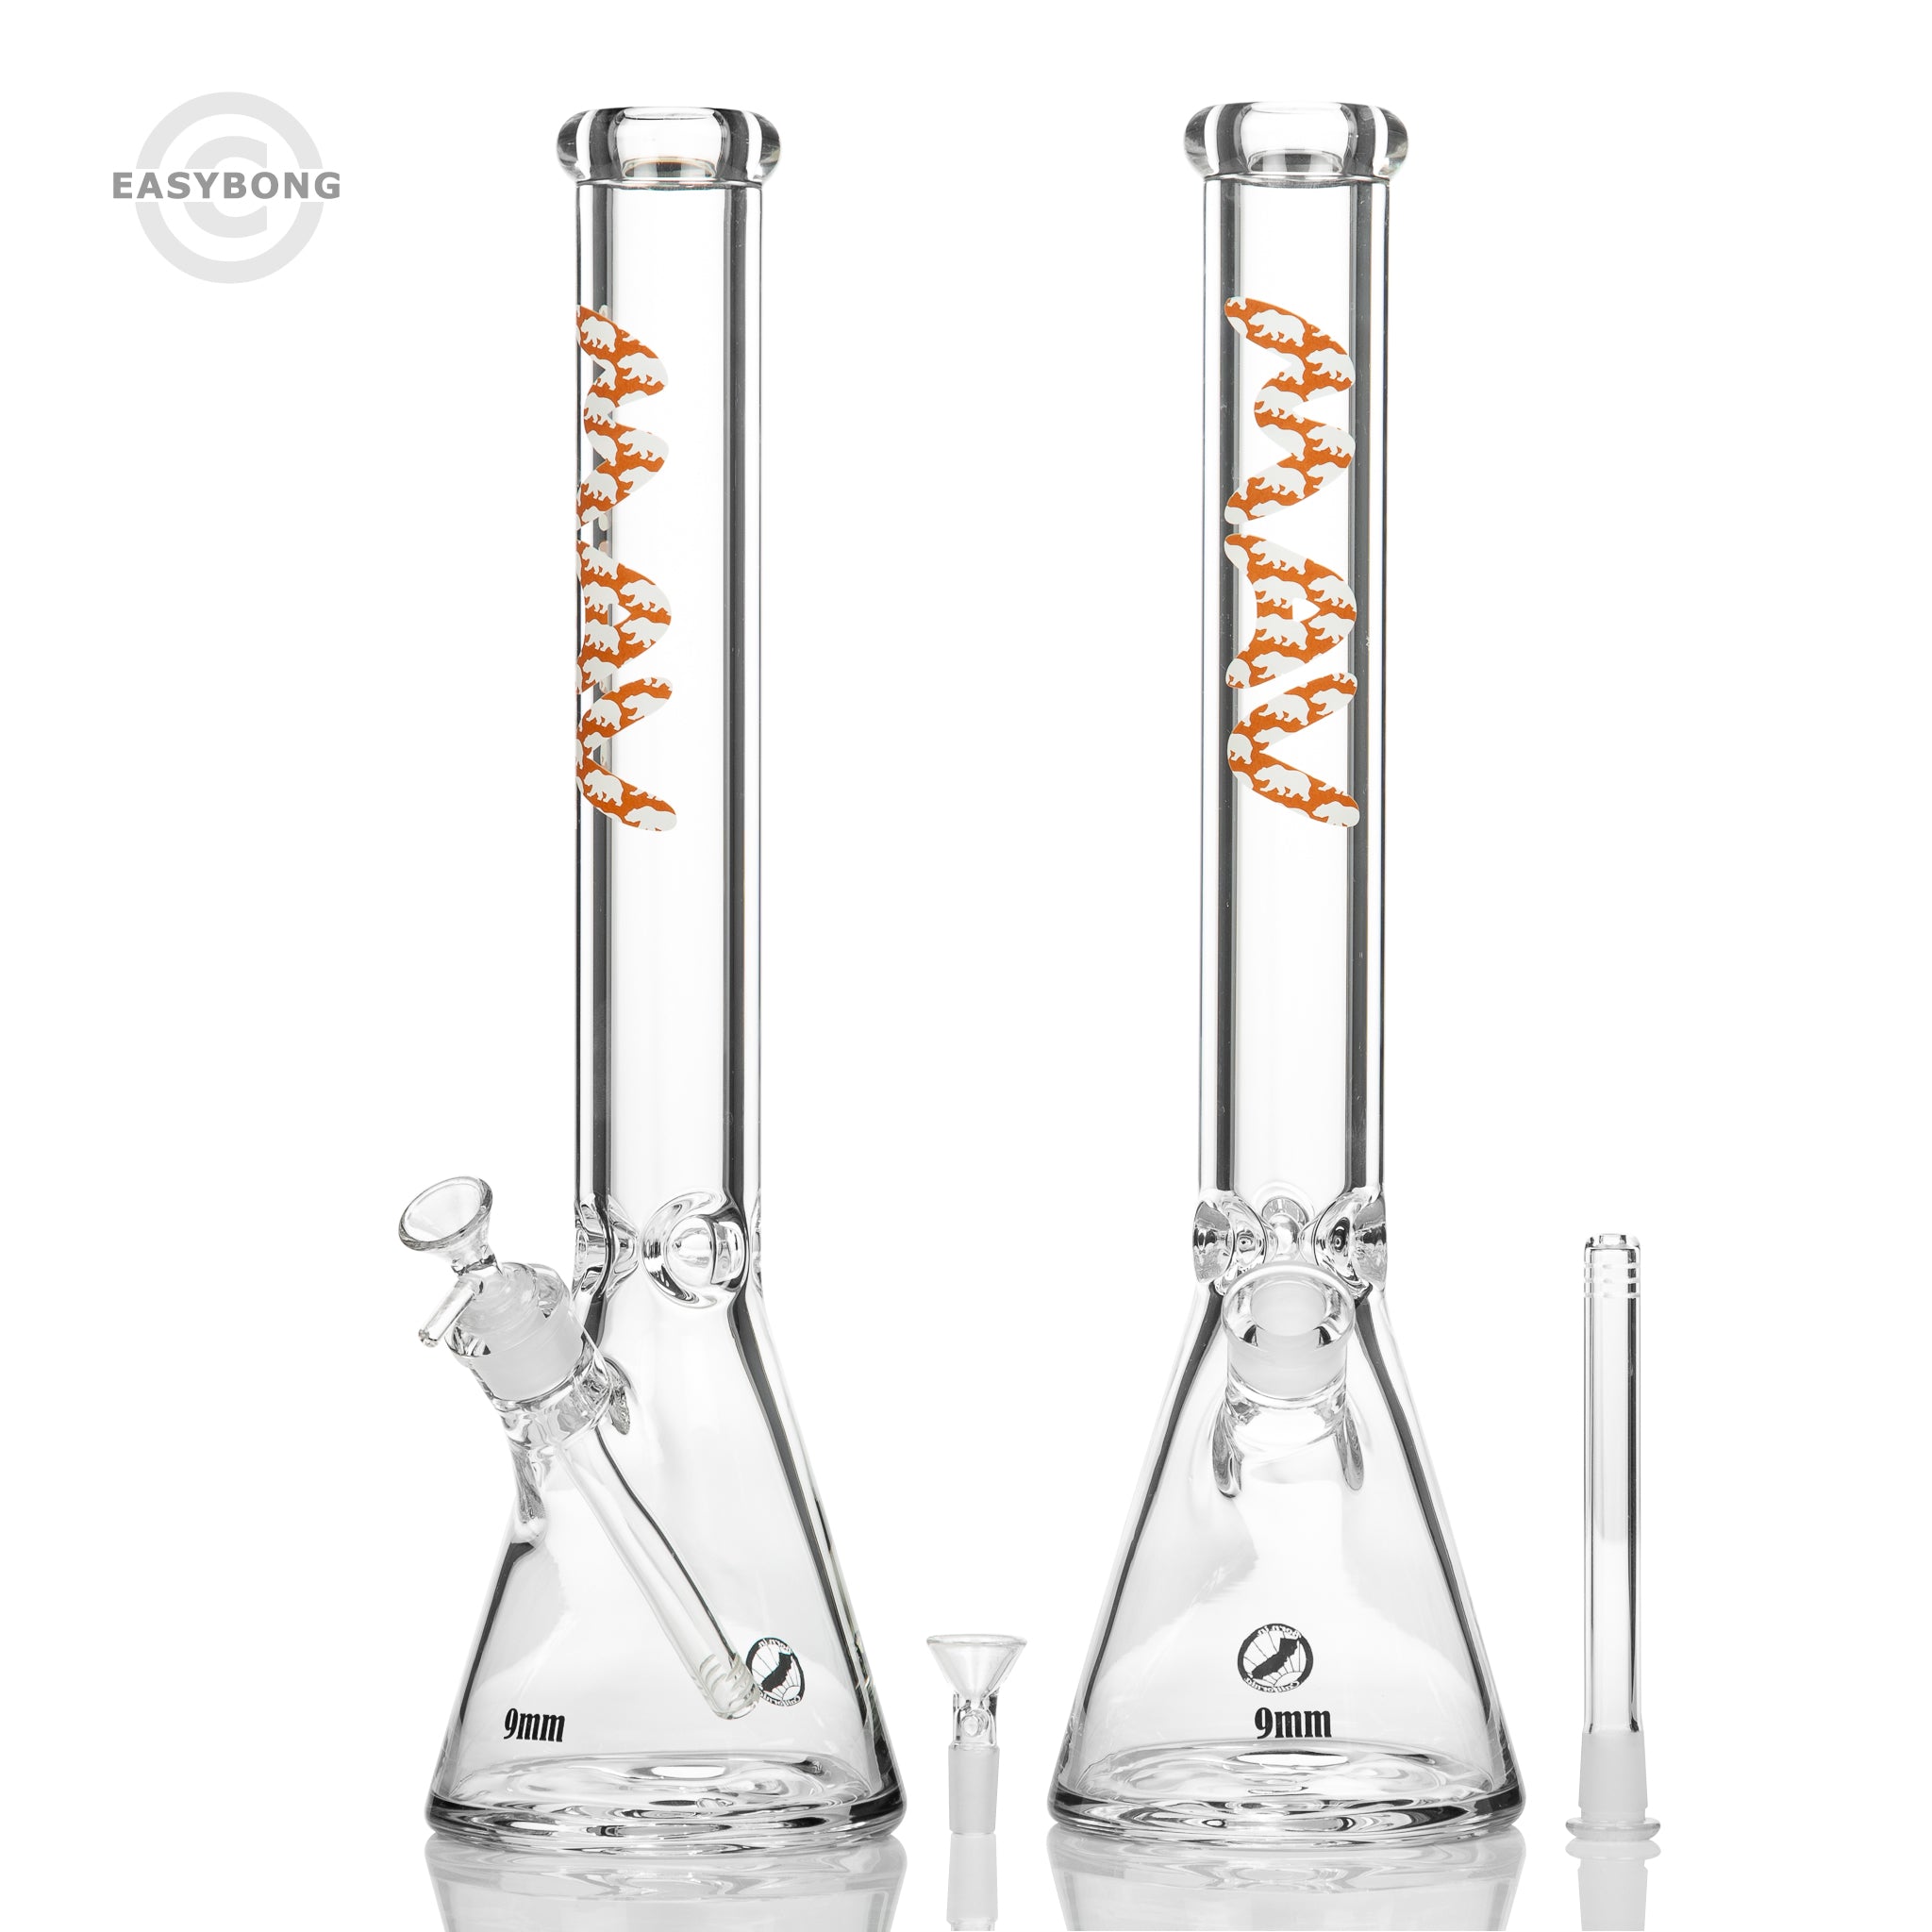 Large size, thick and heavy  glass beaker bongs from Mav glass .